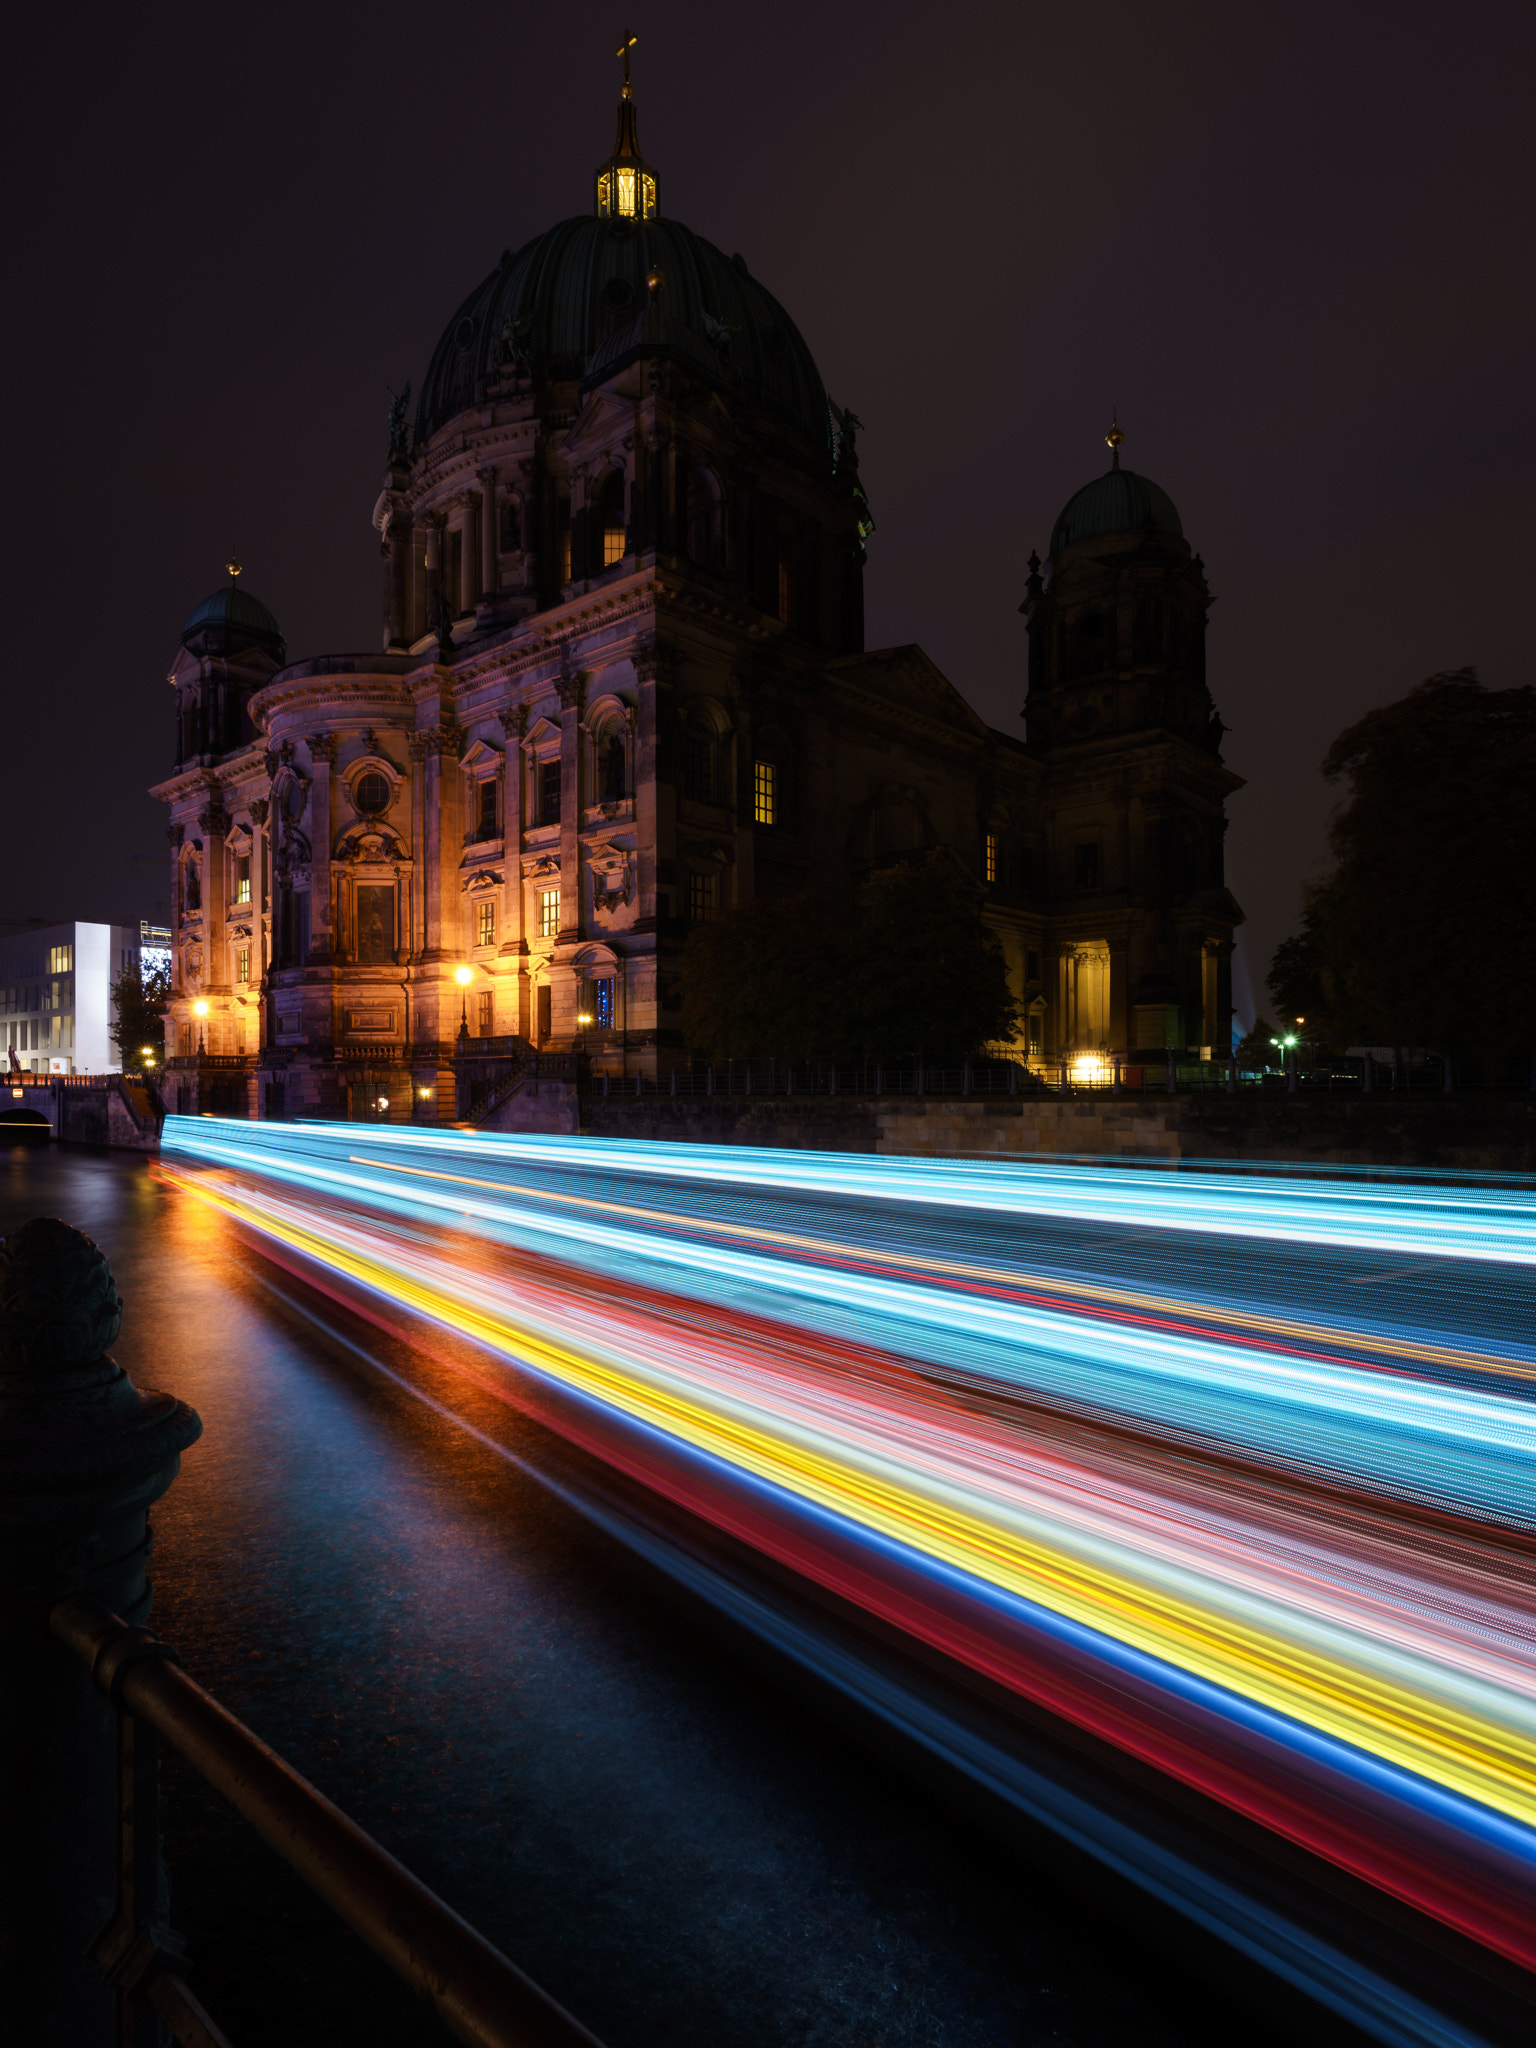 Sony a7 II sample photo. The berliner dom by night photography